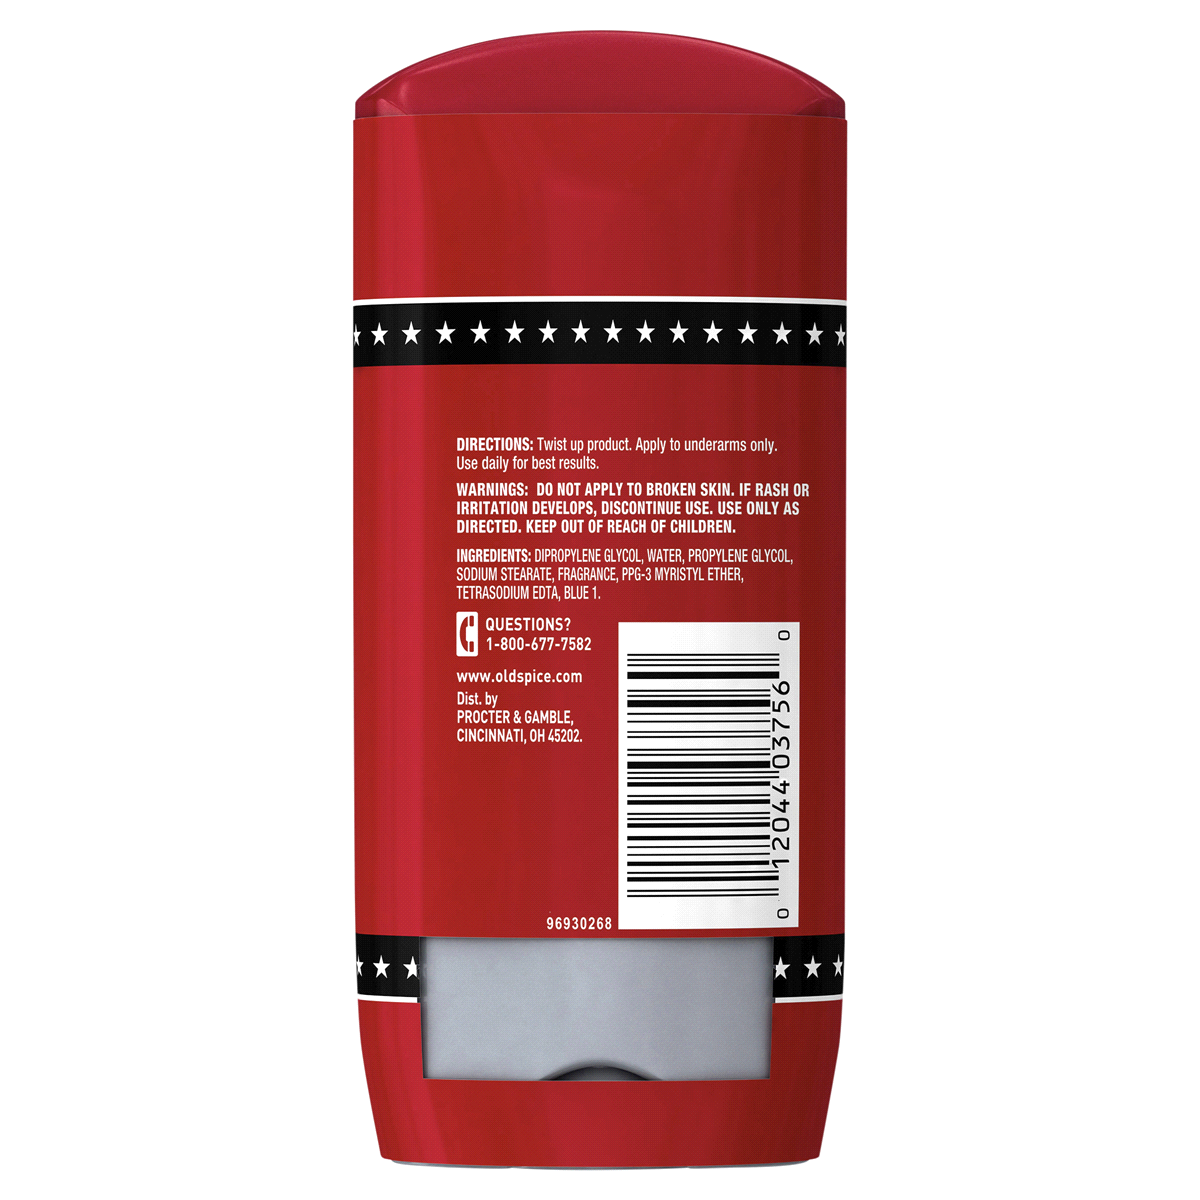 slide 12 of 95, Old Spice Red Collection Swagger Scent Deodorant for Men, Value Pack, 3.0 oz, Pack of 2, 2 ct; 3 oz